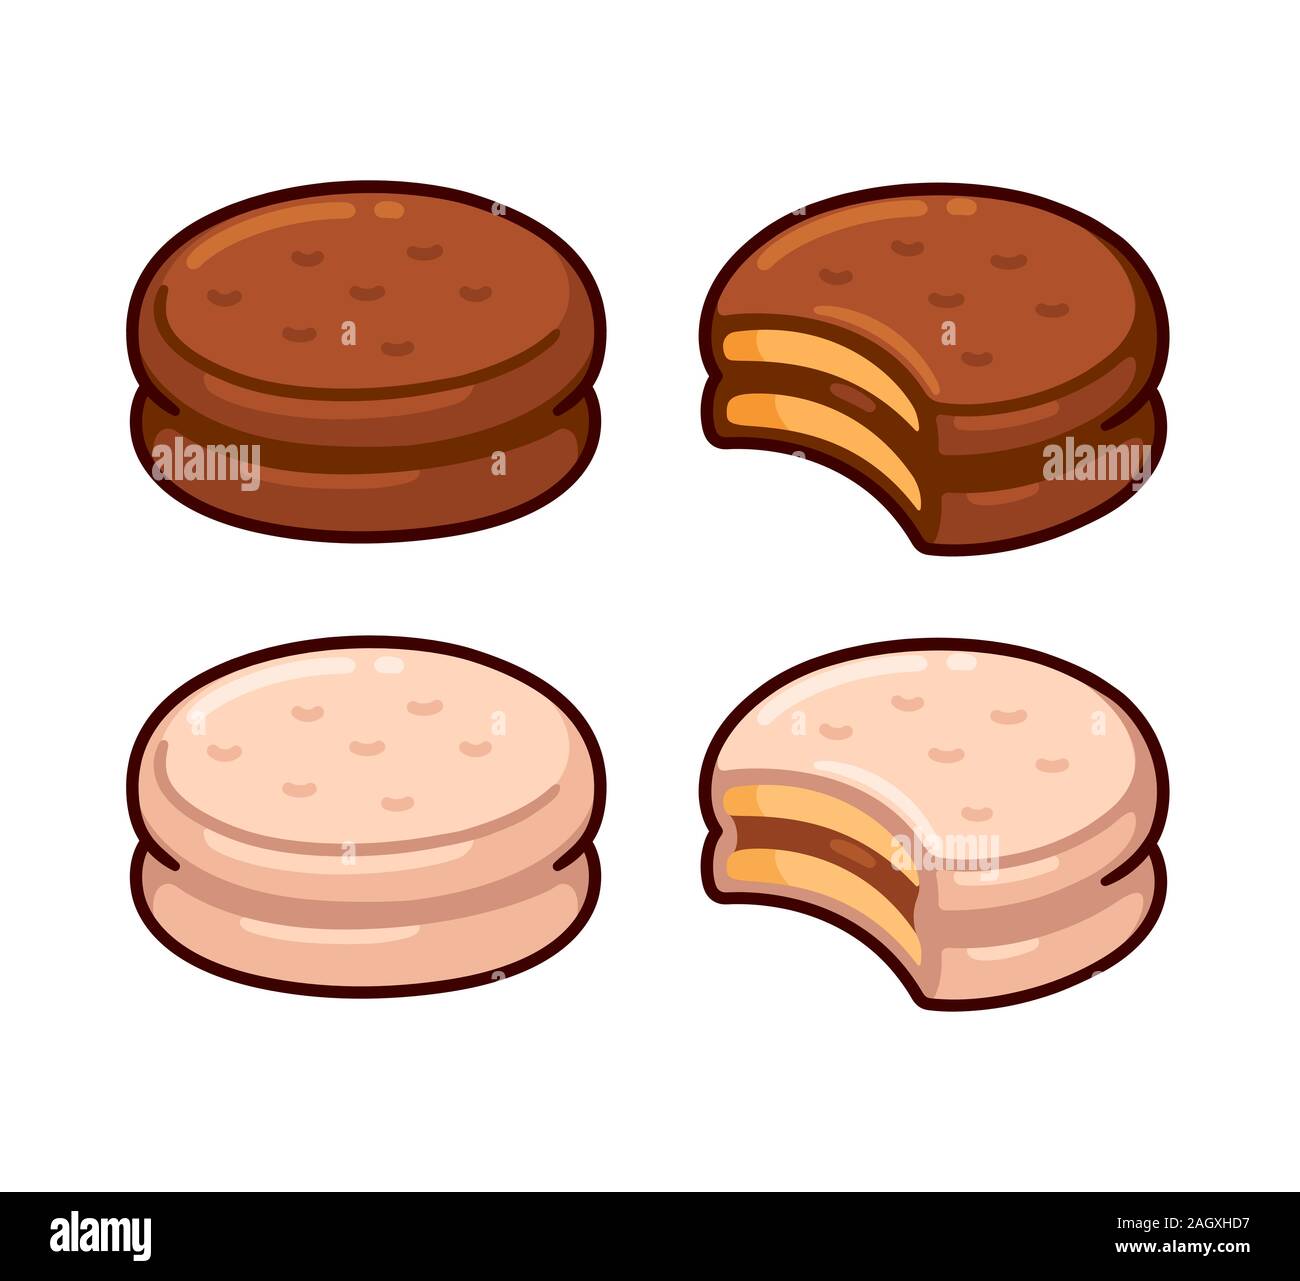 Alfajor chocolate covered cookie set. Traditional Argentinian sandwich cookies with filled dulce de leche. Isolated vector clip art illustration. Stock Vector